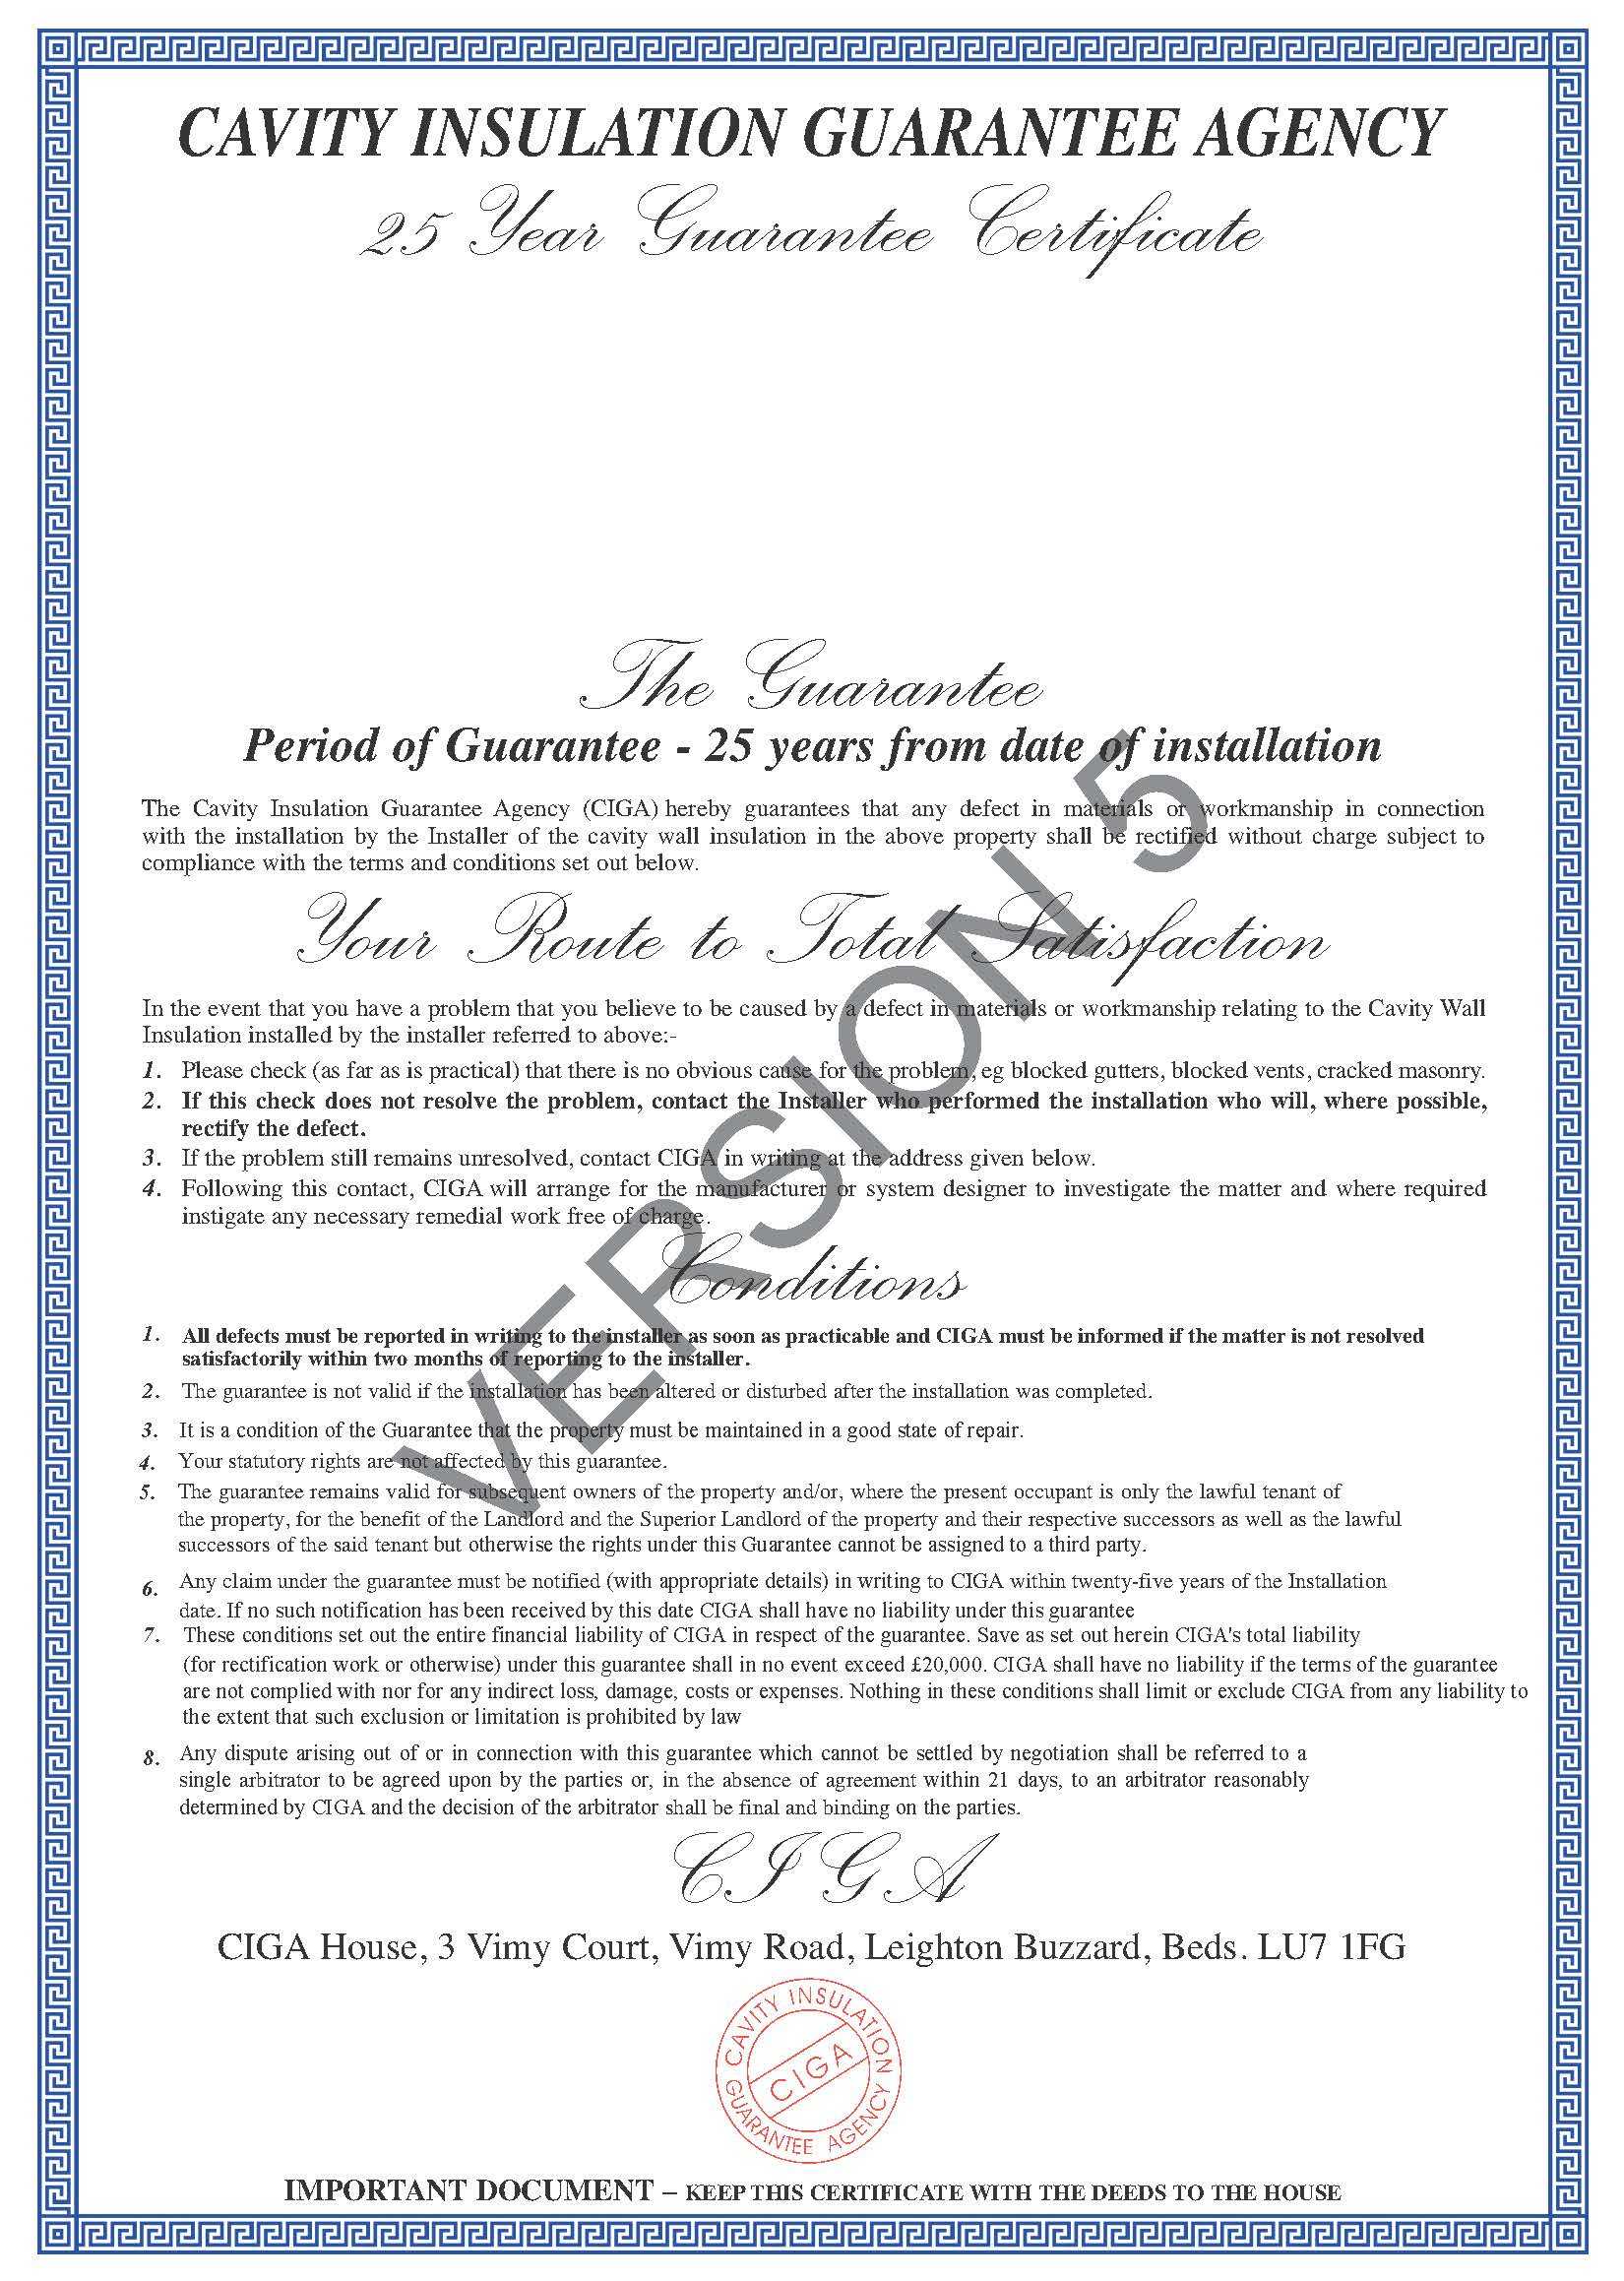 Practical Completion Certificate Template Uk | Format For A With Regard To Practical Completion Certificate Template Uk